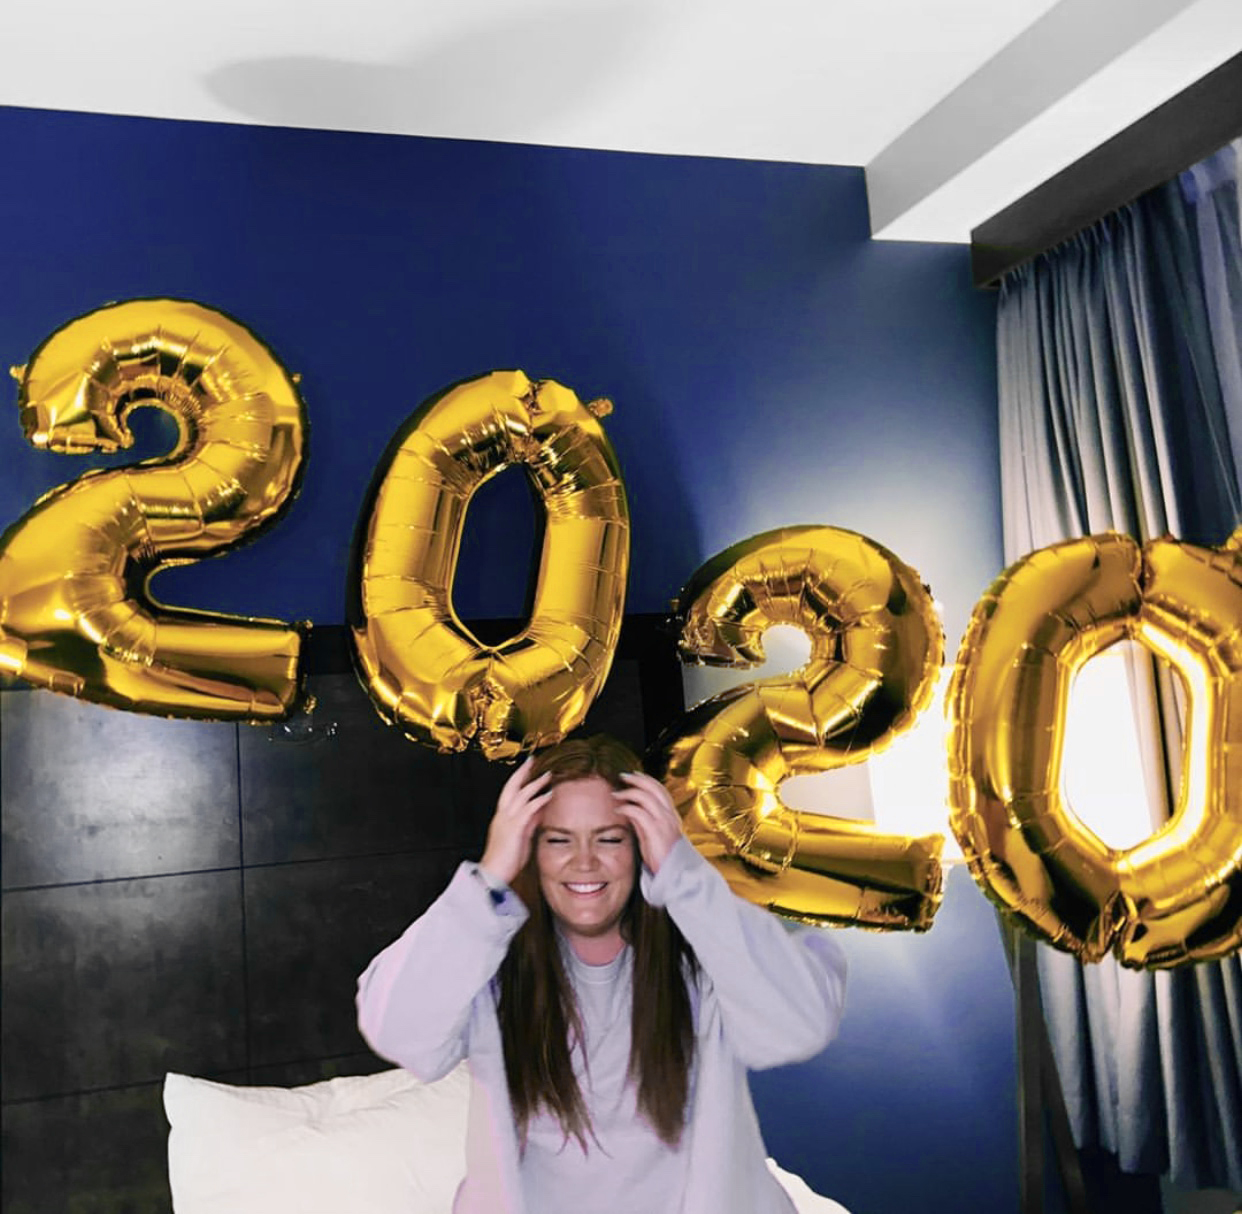 Female student celebrates graduation at home with 2020 balloon.